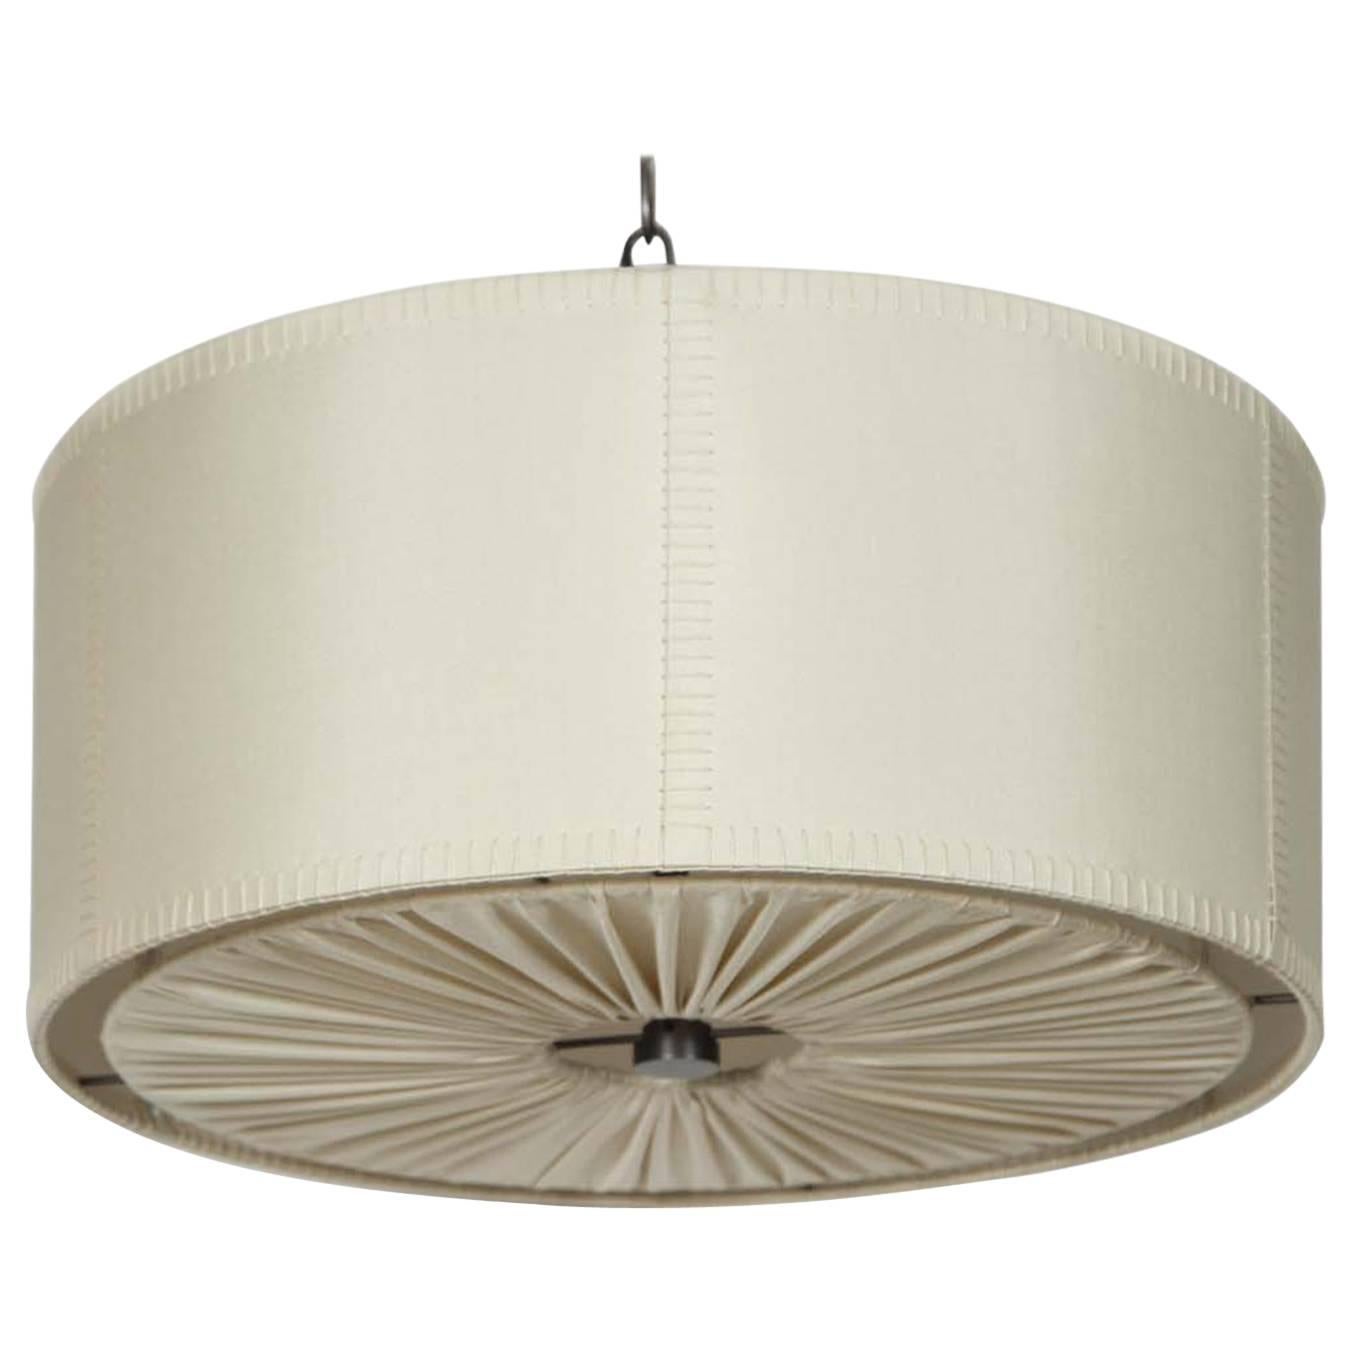 Hand-Stitched Laced Linen Shaded Ceiling Mount Fixture